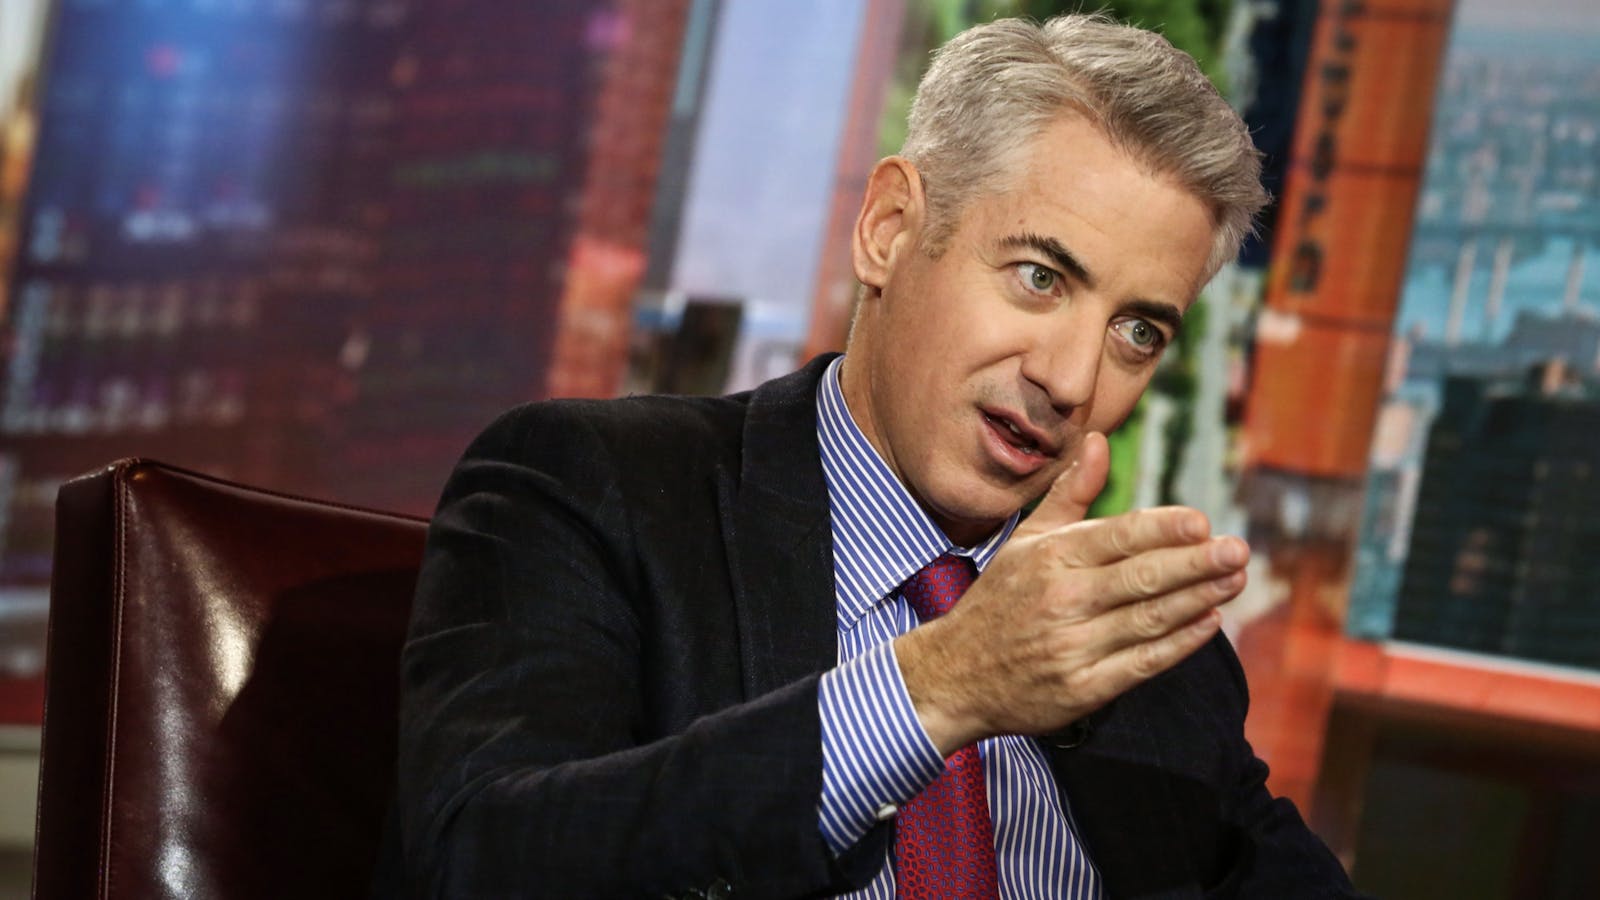 Hedge fund manager Bill Ackman. Photo by Bloomberg.